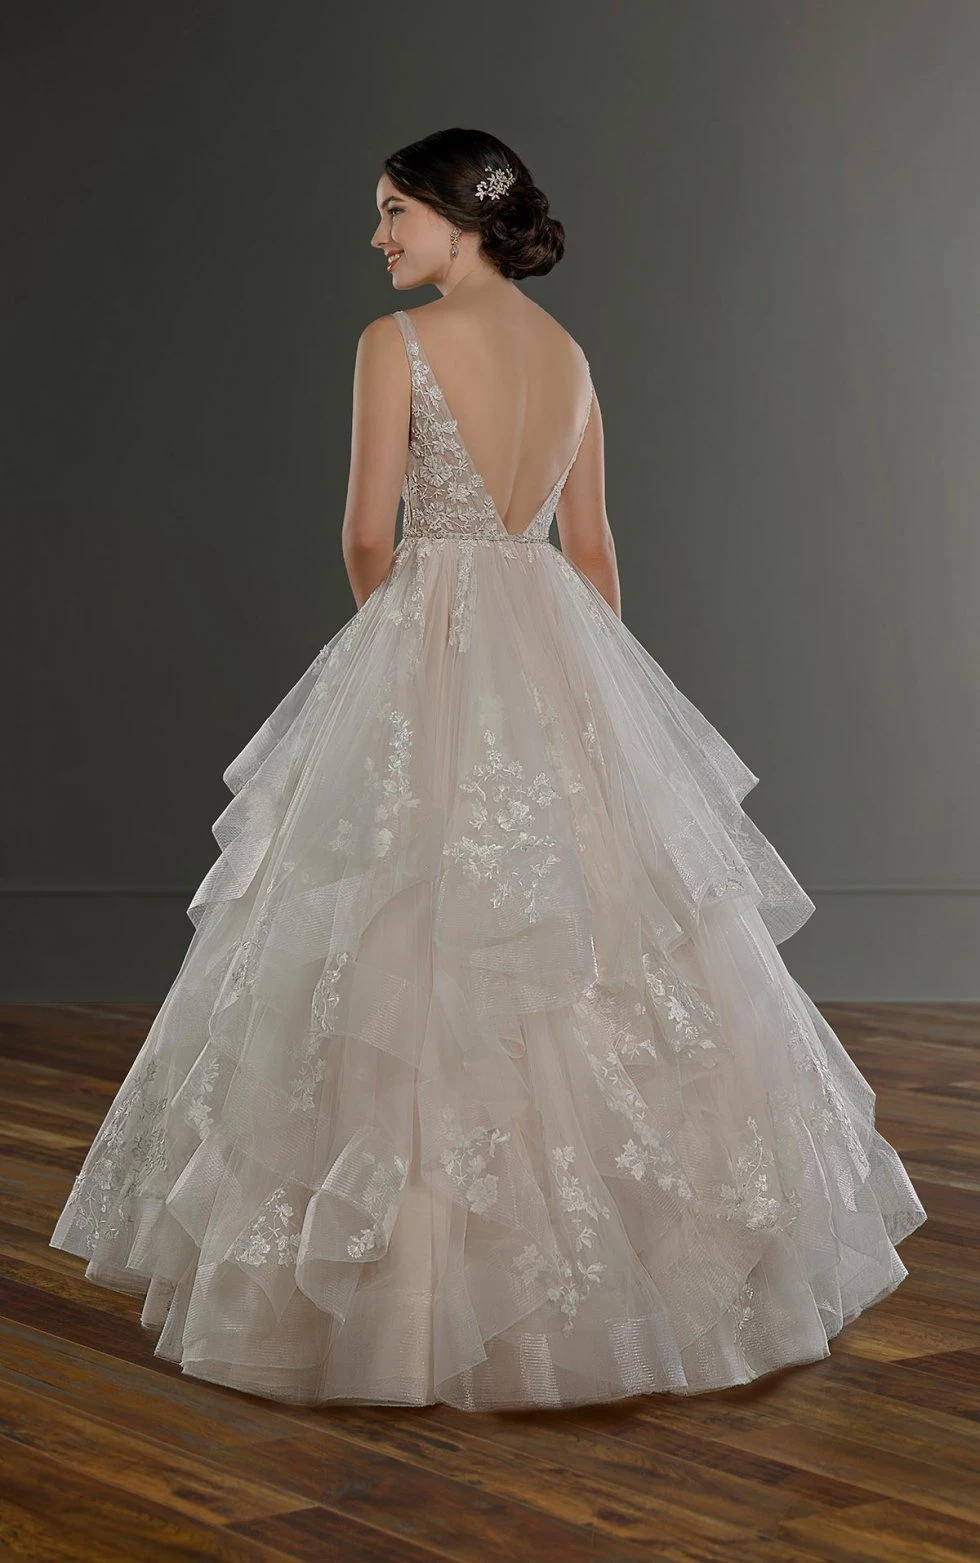 Bride wears open-back princess wedding dress with layered lace and tulle skirt.